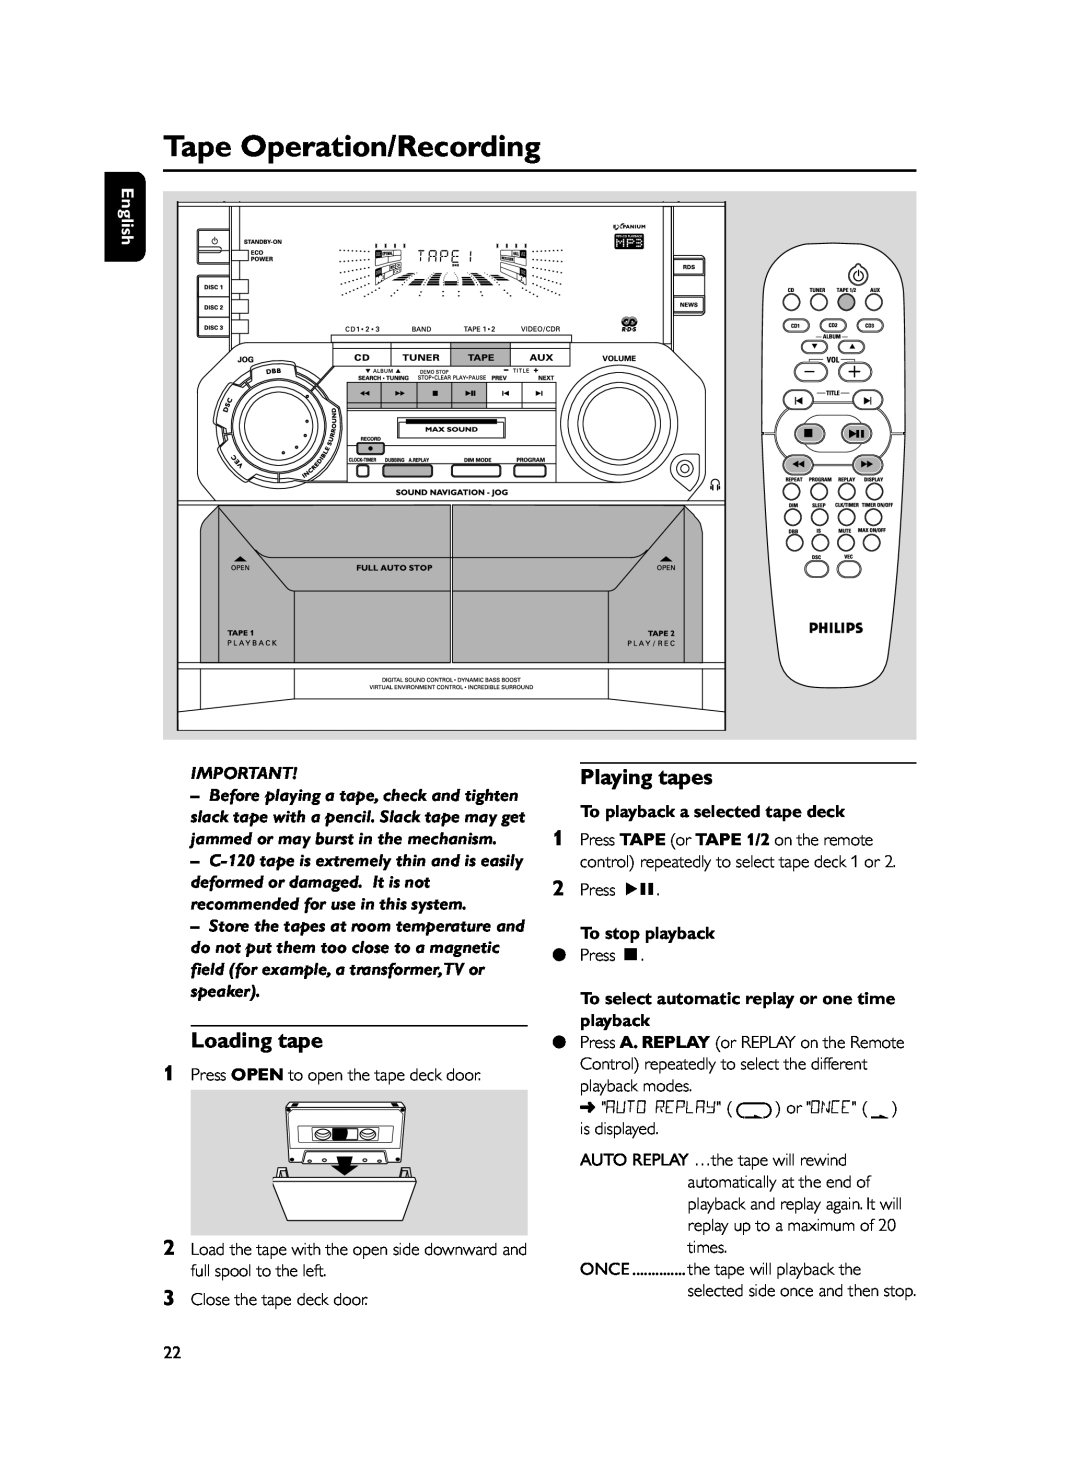 Philips FWM399 Tape Operation/Recording, Loading tape, Playing tapes, To playback a selected tape deck, To stop playback 